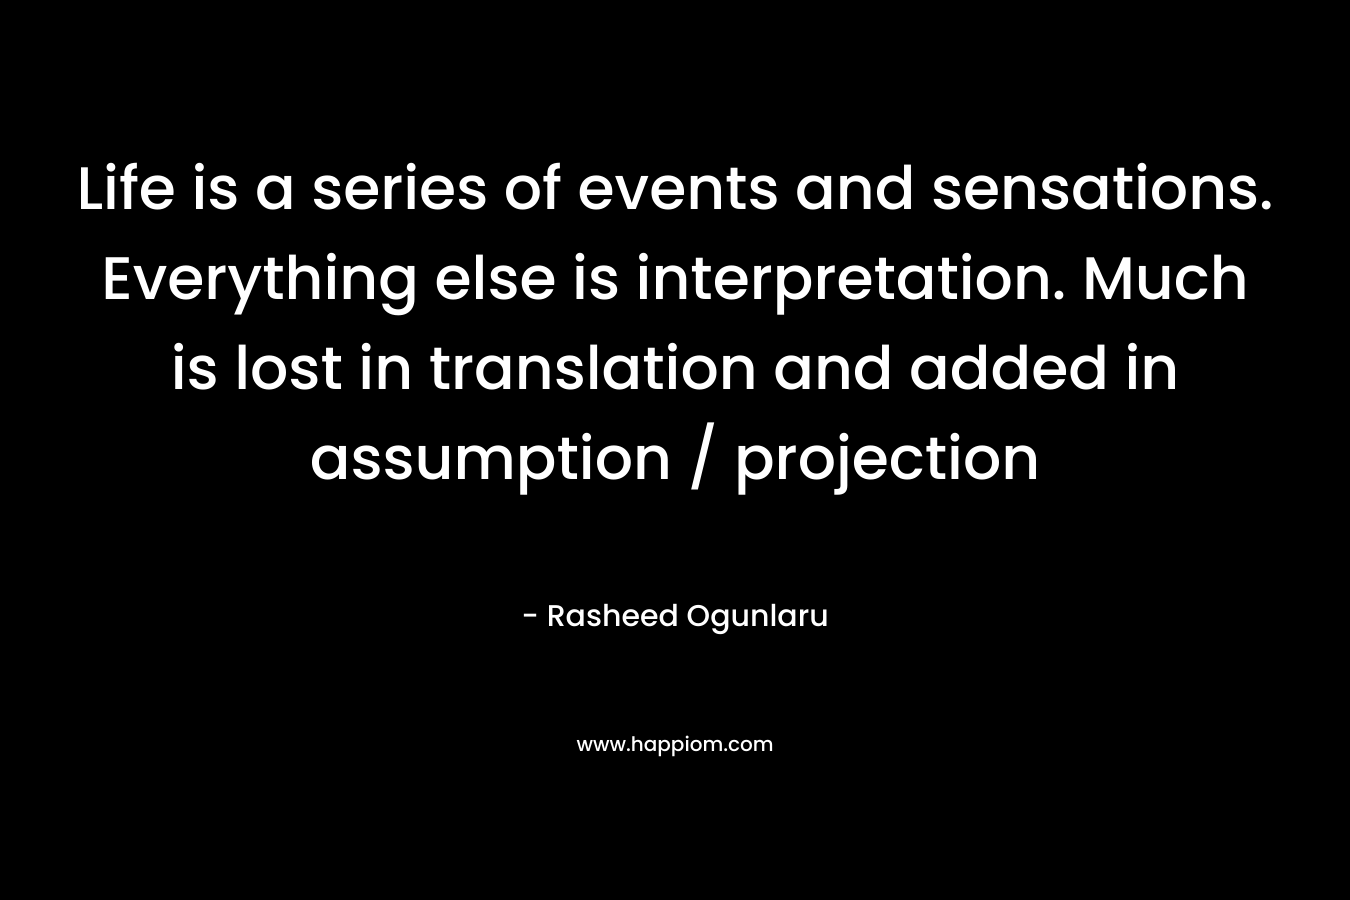 Life is a series of events and sensations. Everything else is interpretation. Much is lost in translation and added in assumption / projection